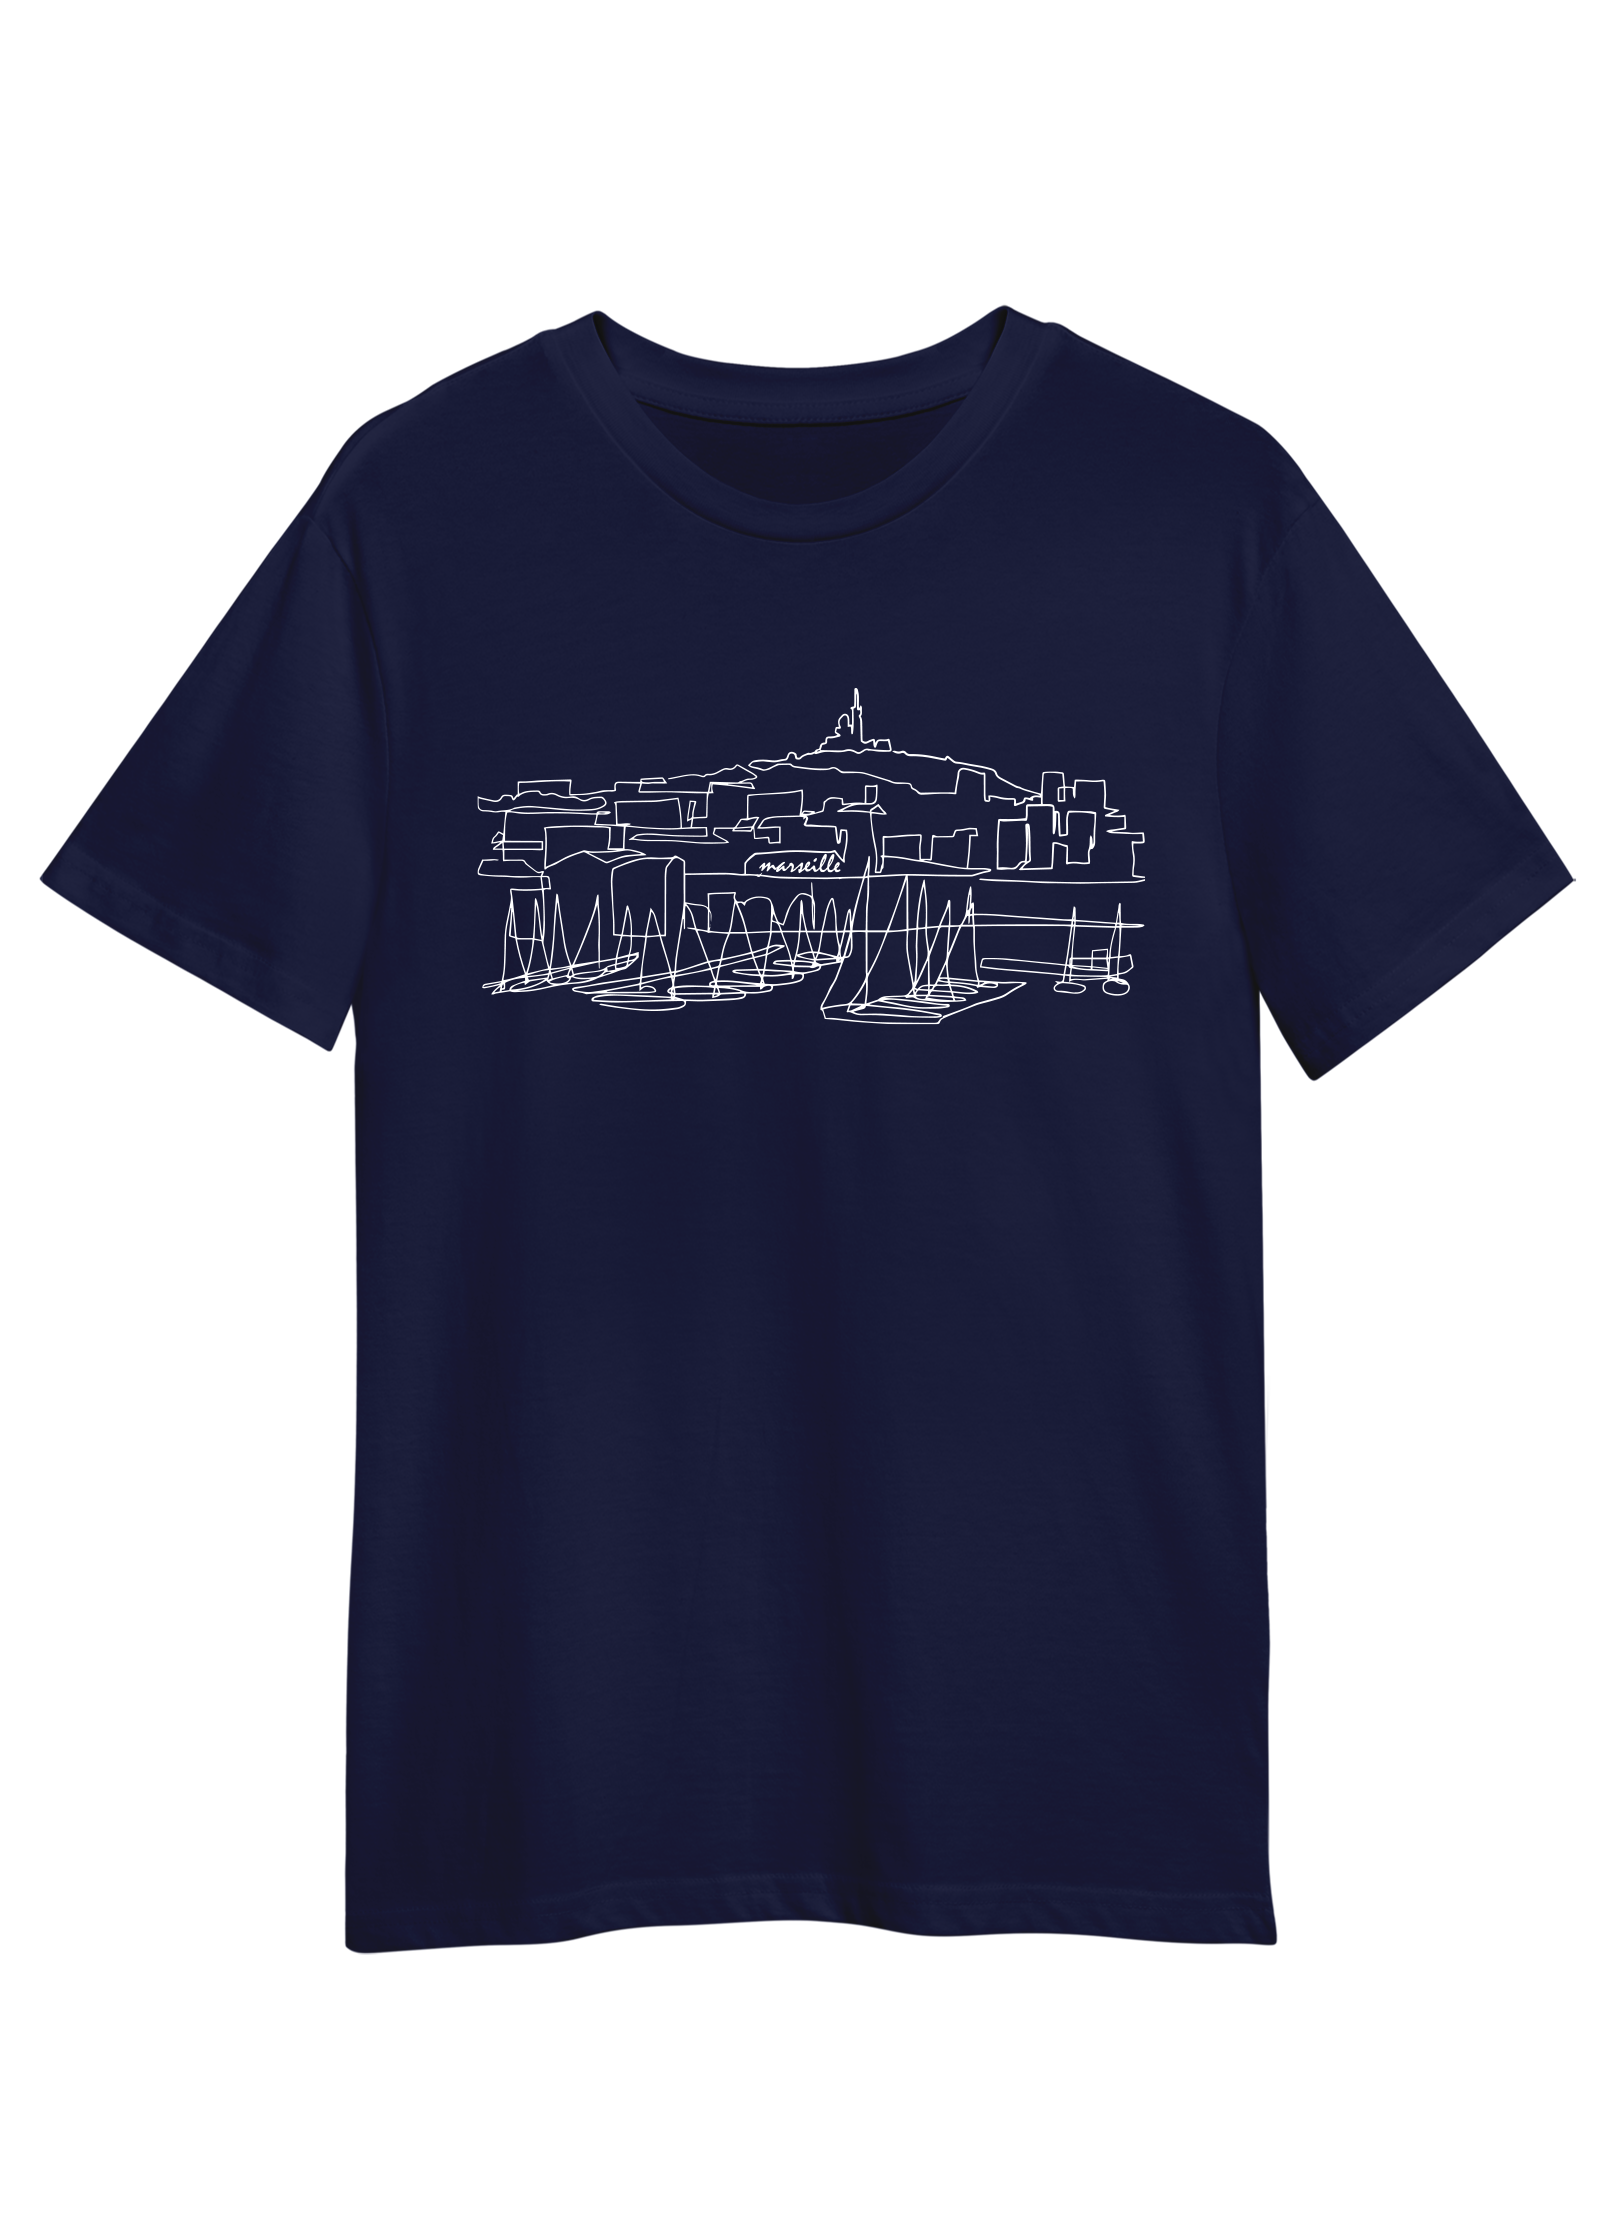 Tee shirt made in France marine vieux-port - Fil Rouge